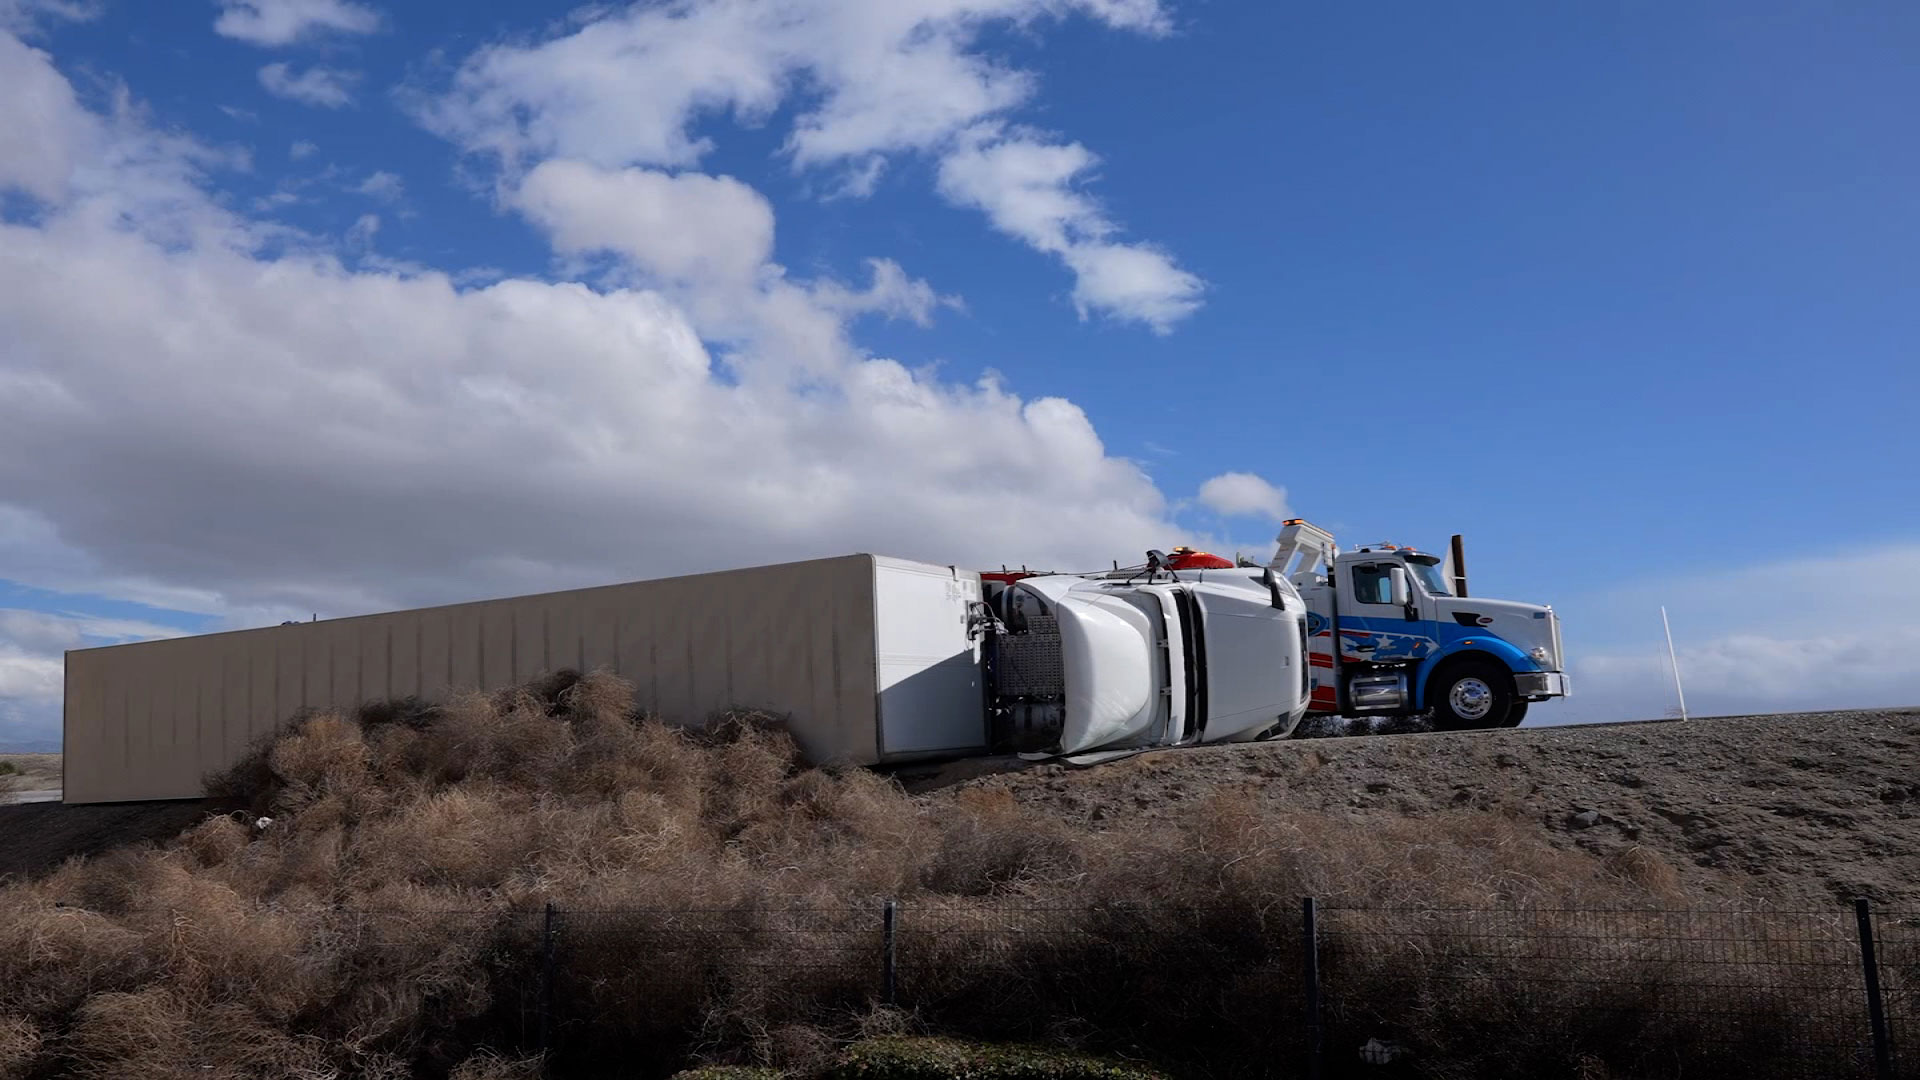 A still from a video shows a semi-truck that was blown over in Grapevine, California, on Sunday.